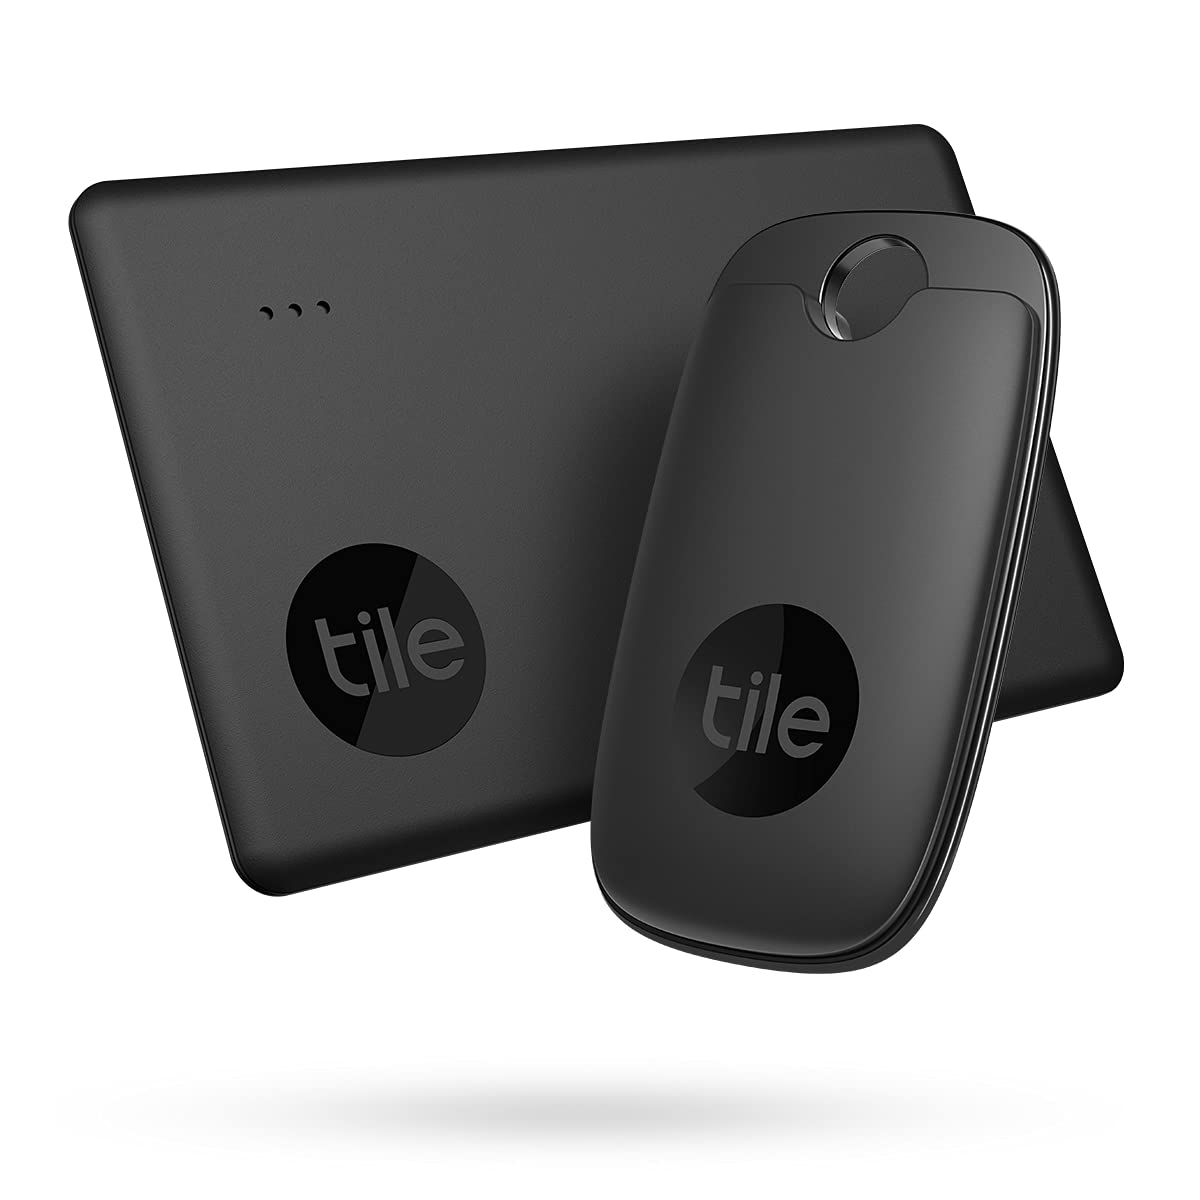 Tile Pro, Powerful Bluetooth Tracker, Keys Finder and Item Locator for Keys, Bags, and More; Water-Resistant. Phone Finder. iOS and Android Compatible.